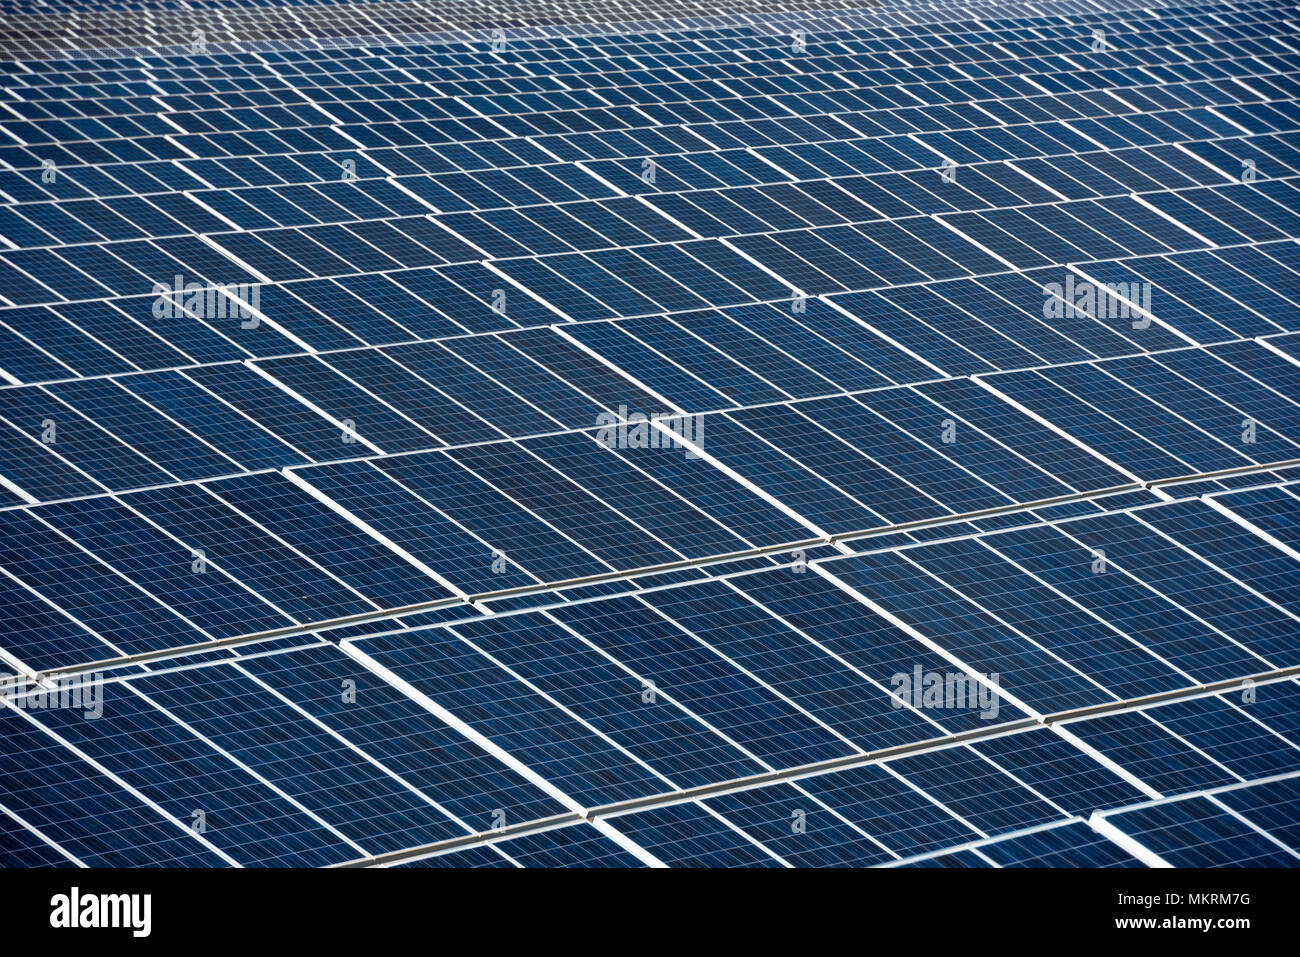 Close up of a row of solar panels in an open field with multiple solar energy panels, Calasparra, Murcia, Spain Stock Photo